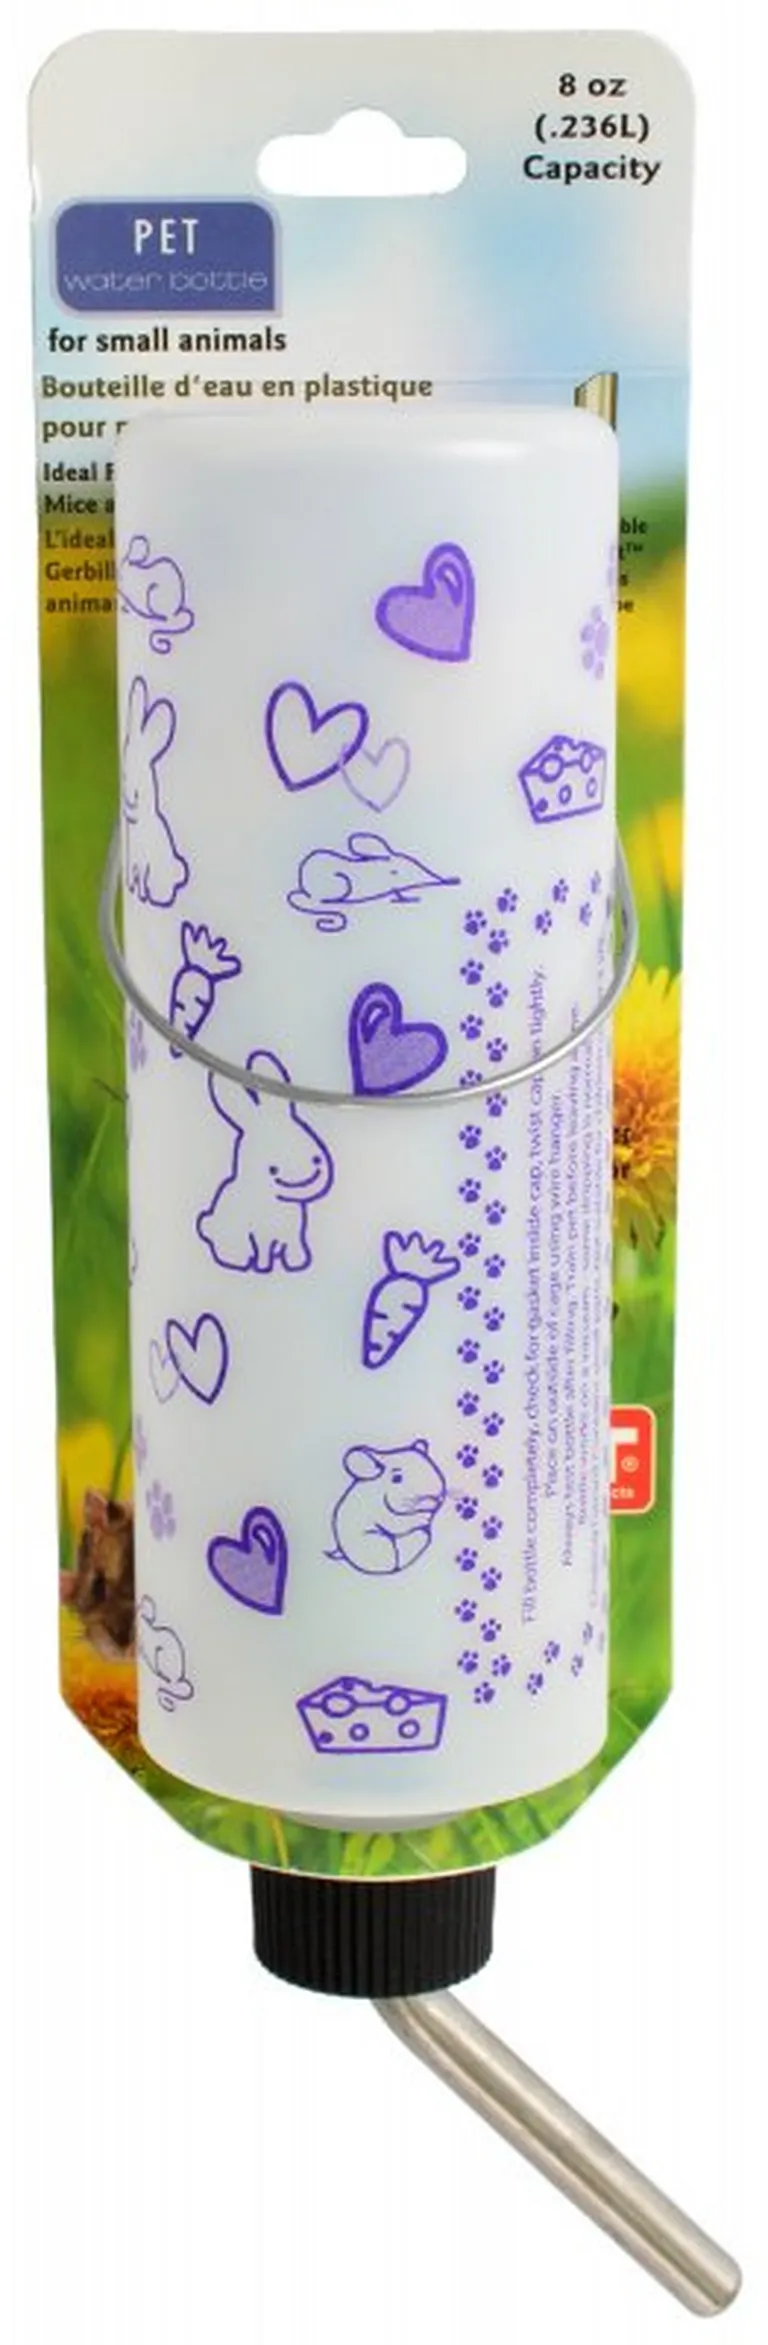 Lixit Pet Water Bottle for Small Animals Opaque Photo 1